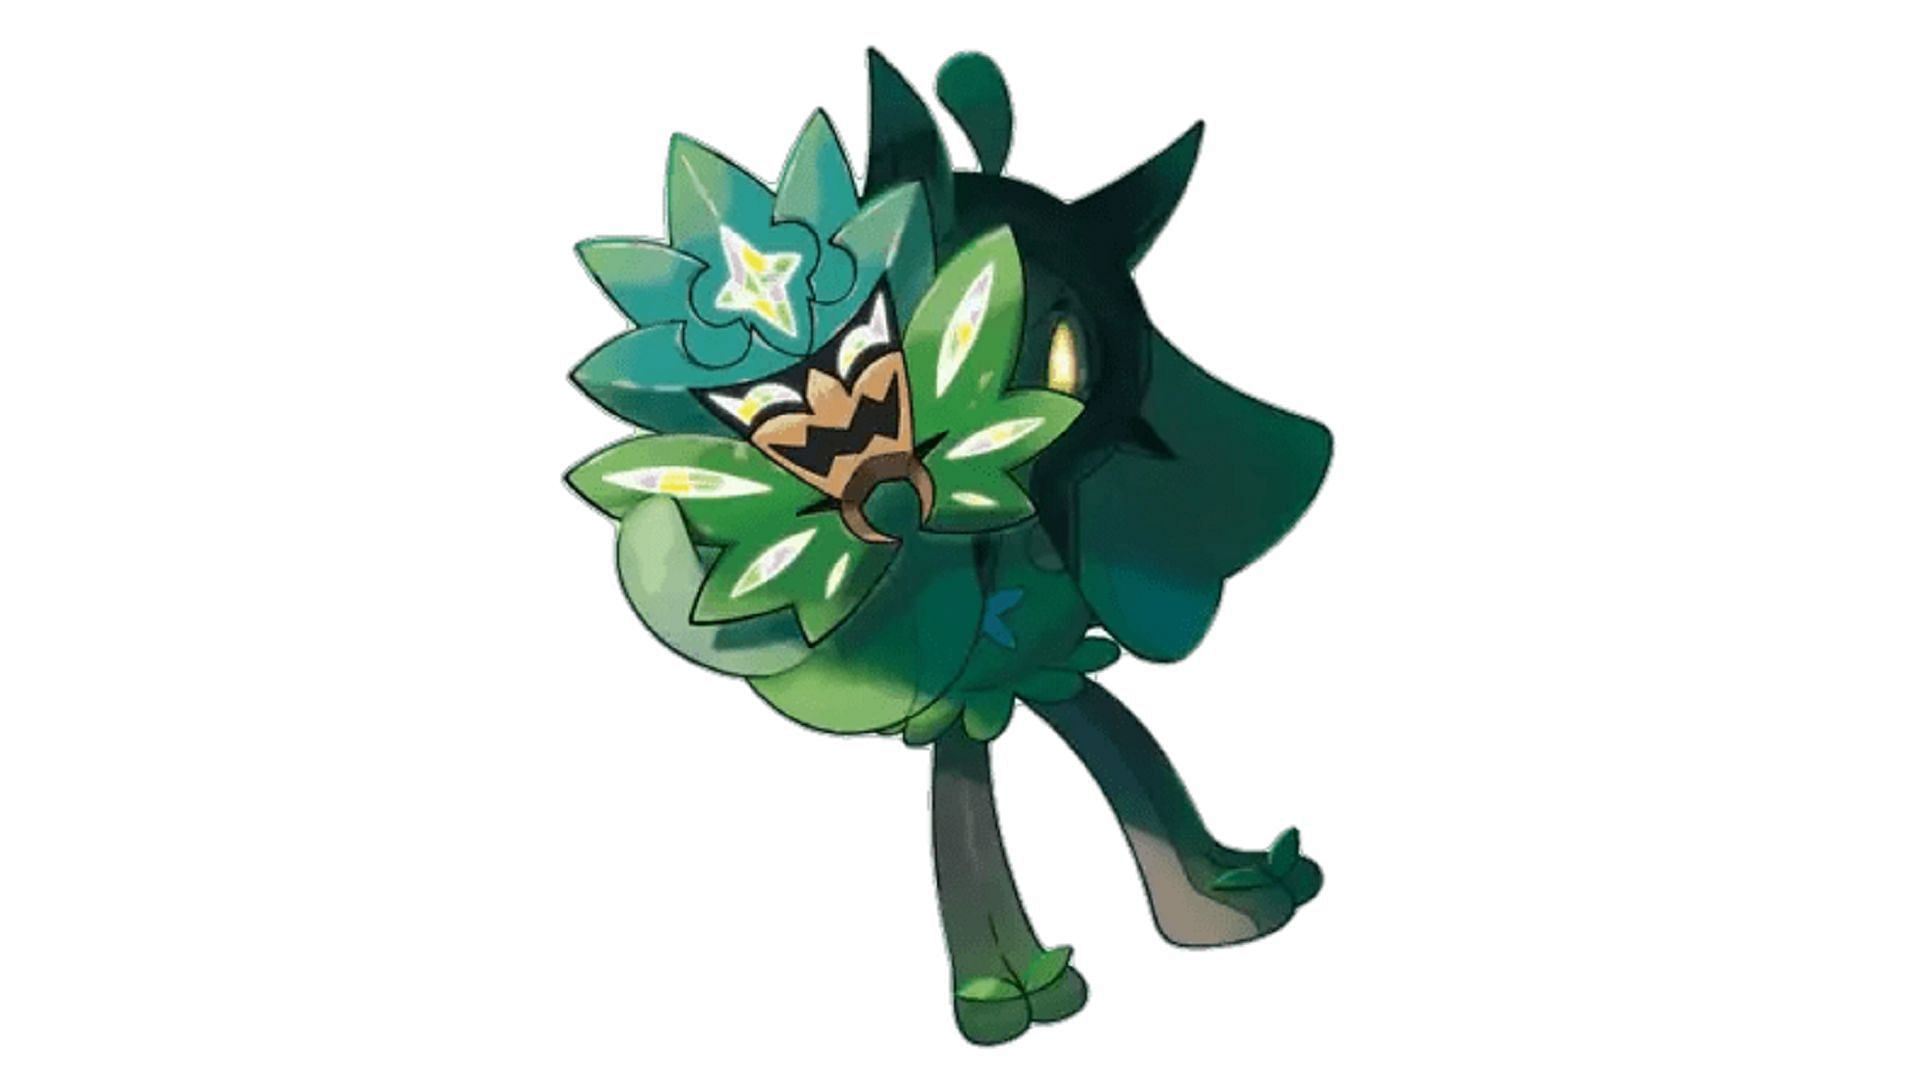 The latest Pokemon Scarlet/Violet leak claims that Ogerpon will be a Fairy/Grass-type (Image via The Pokemon Company)